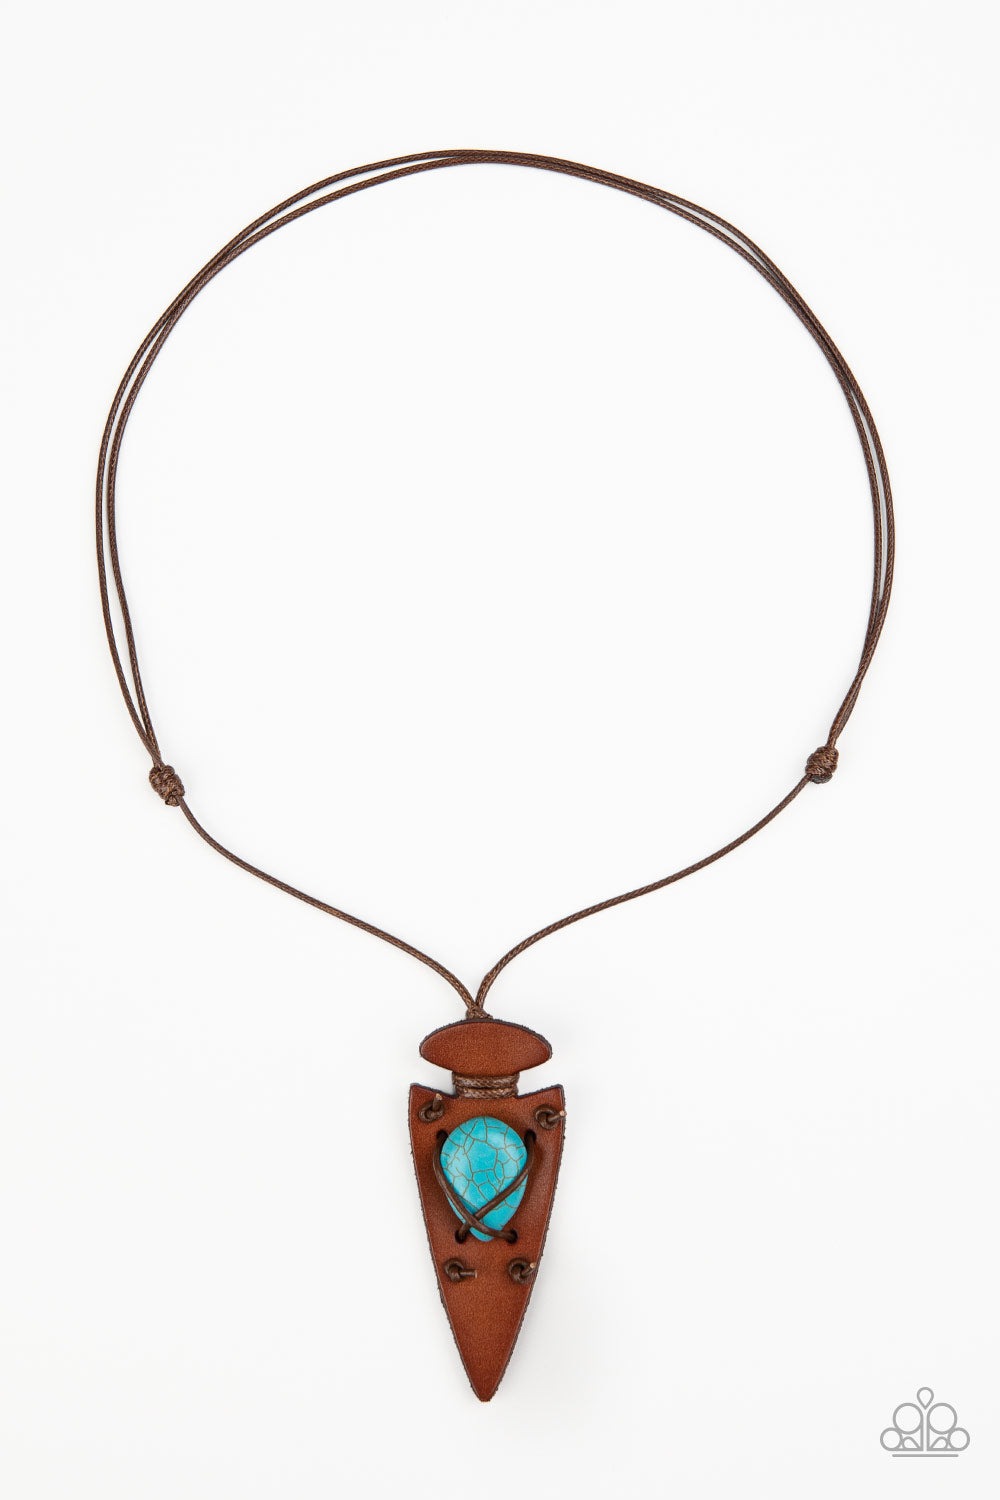 Paparazzi Necklace ~ Hold Your ARROWHEAD Up High - Blue